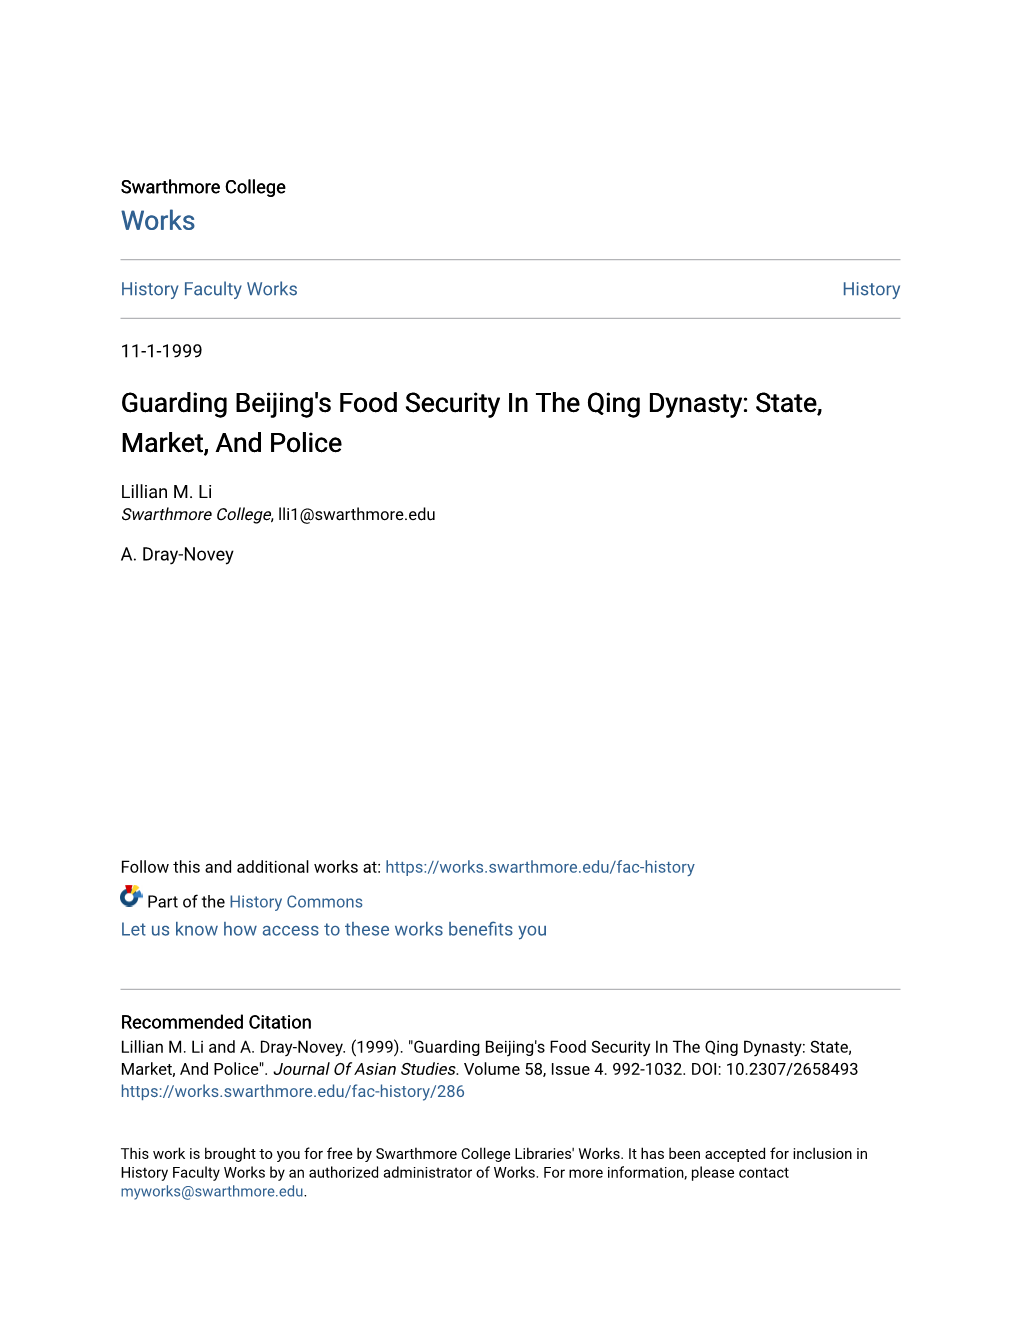 Guarding Beijing's Food Security in the Qing Dynasty: State, Market, and Police